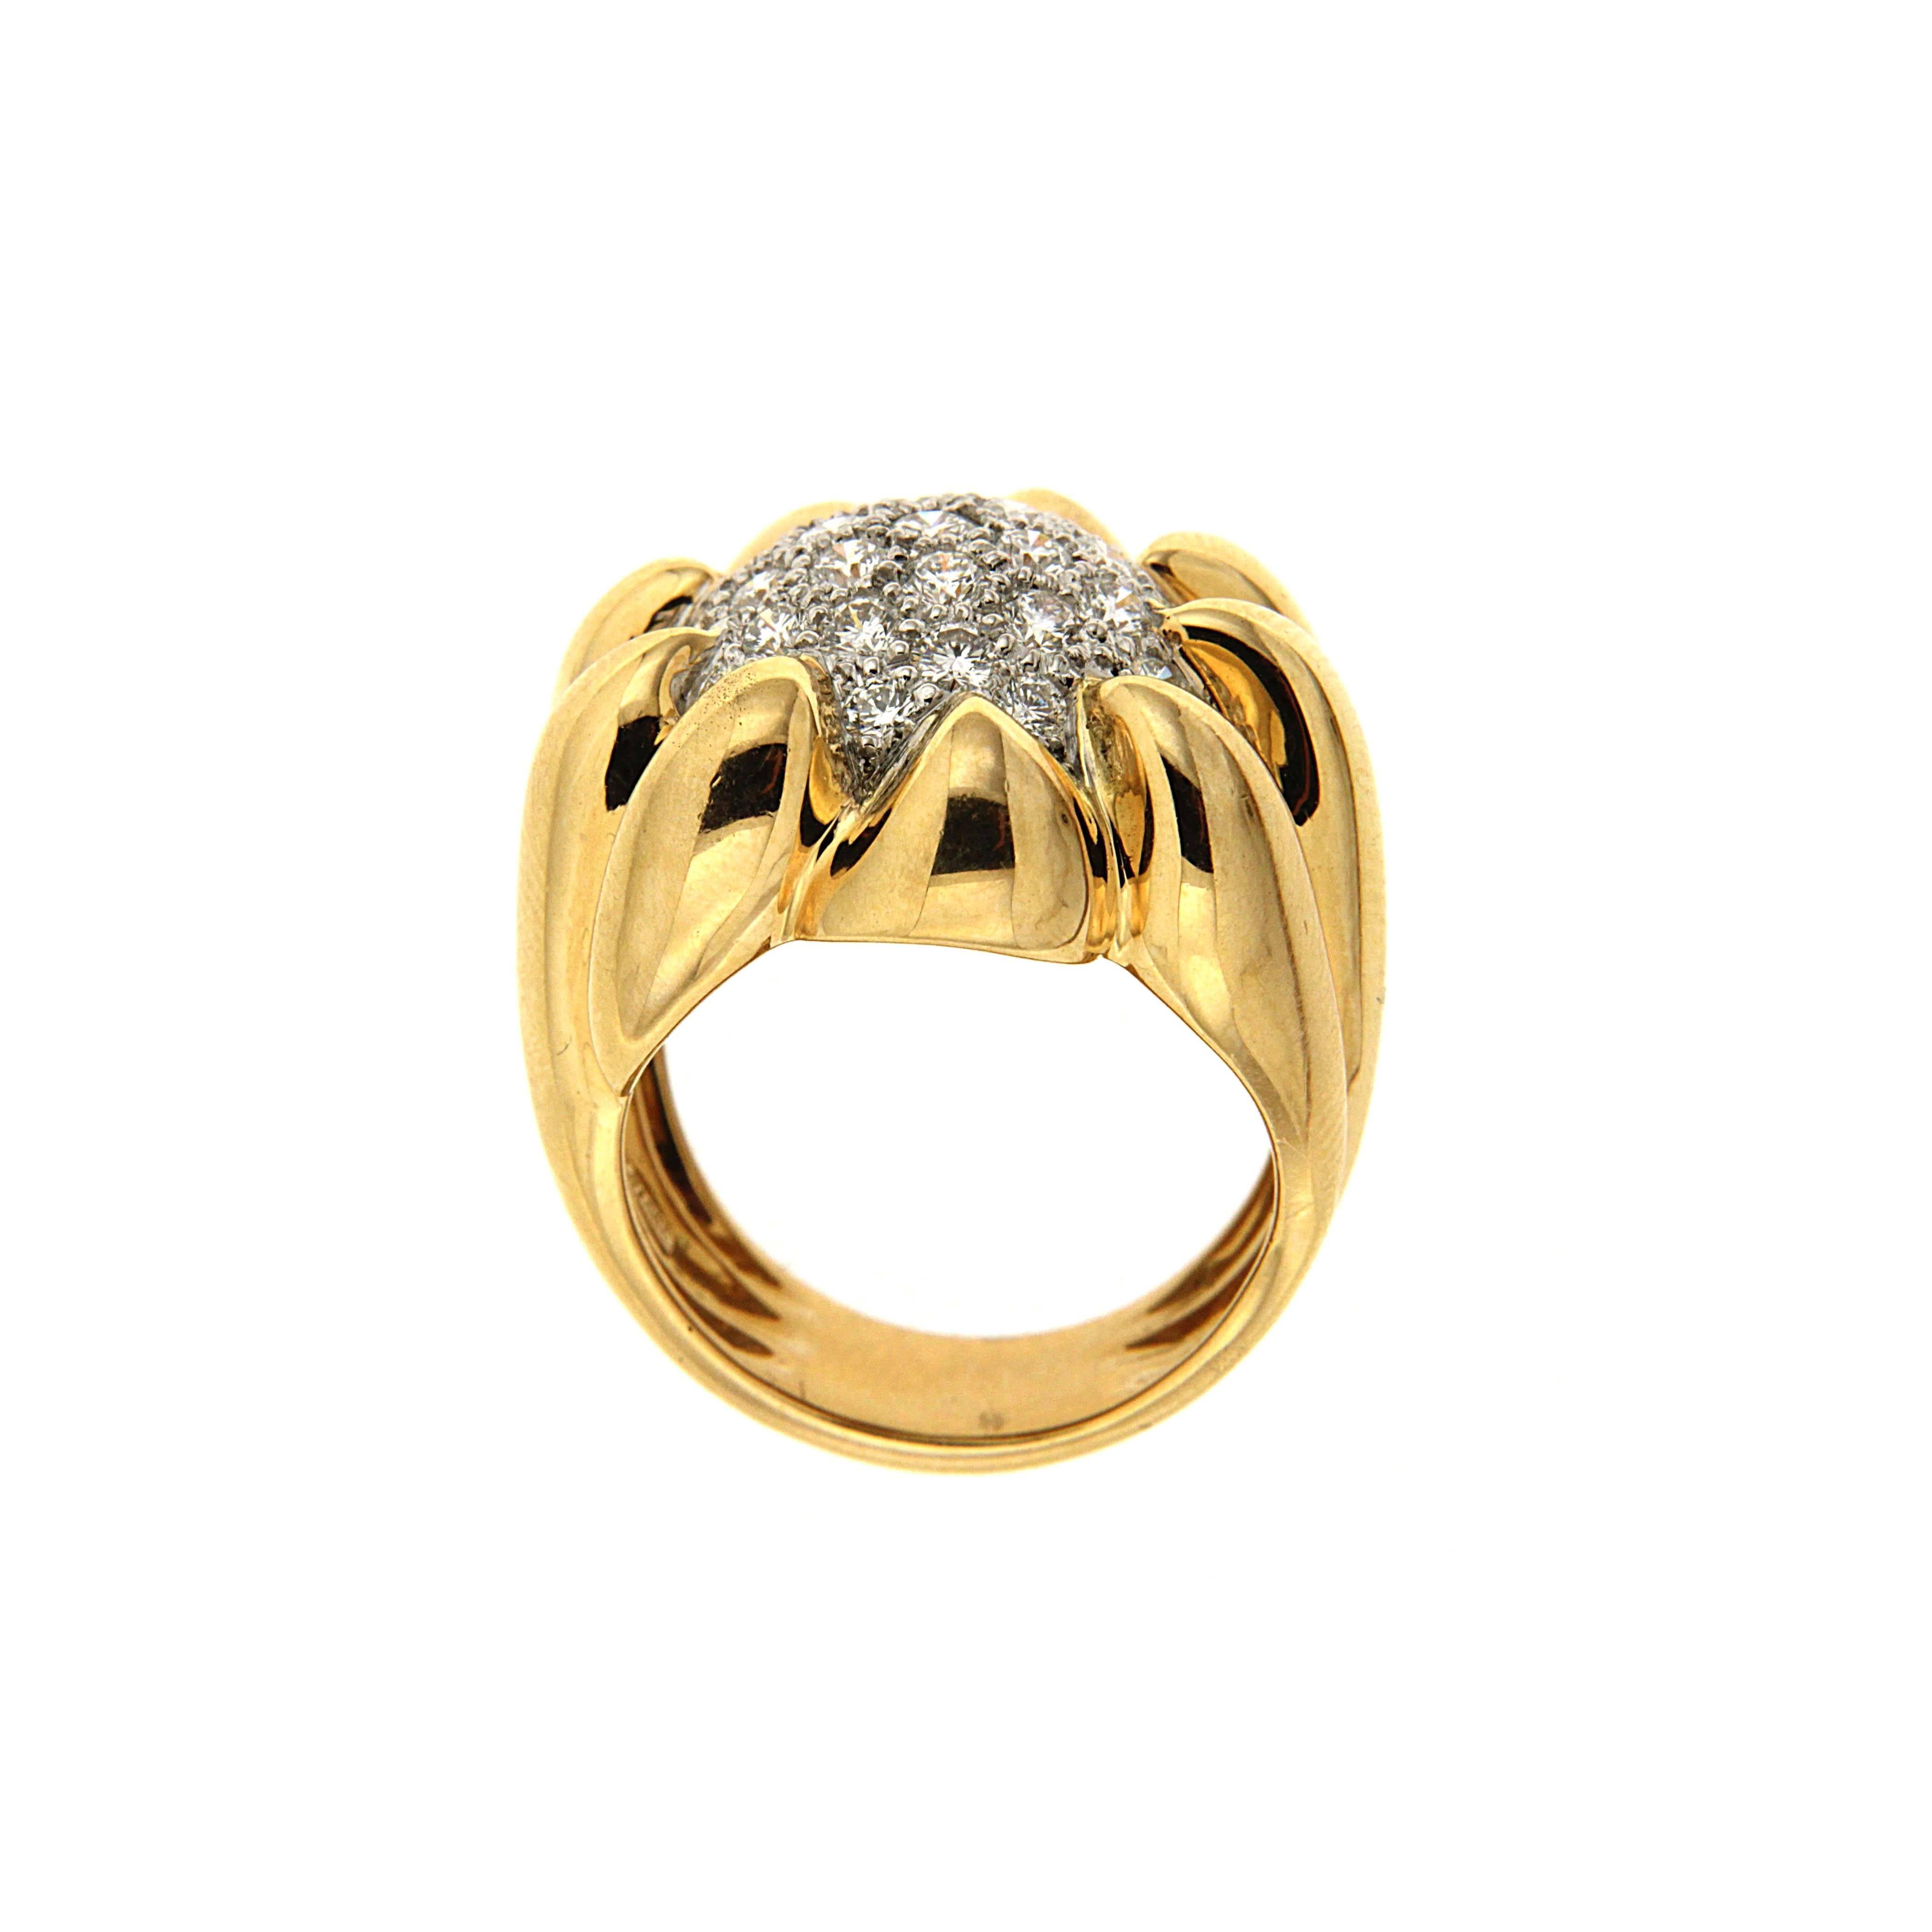 This ring is made in 18kt yellow gold and platinum. It features 1.59 ctw of round brilliant pave set diamonds.